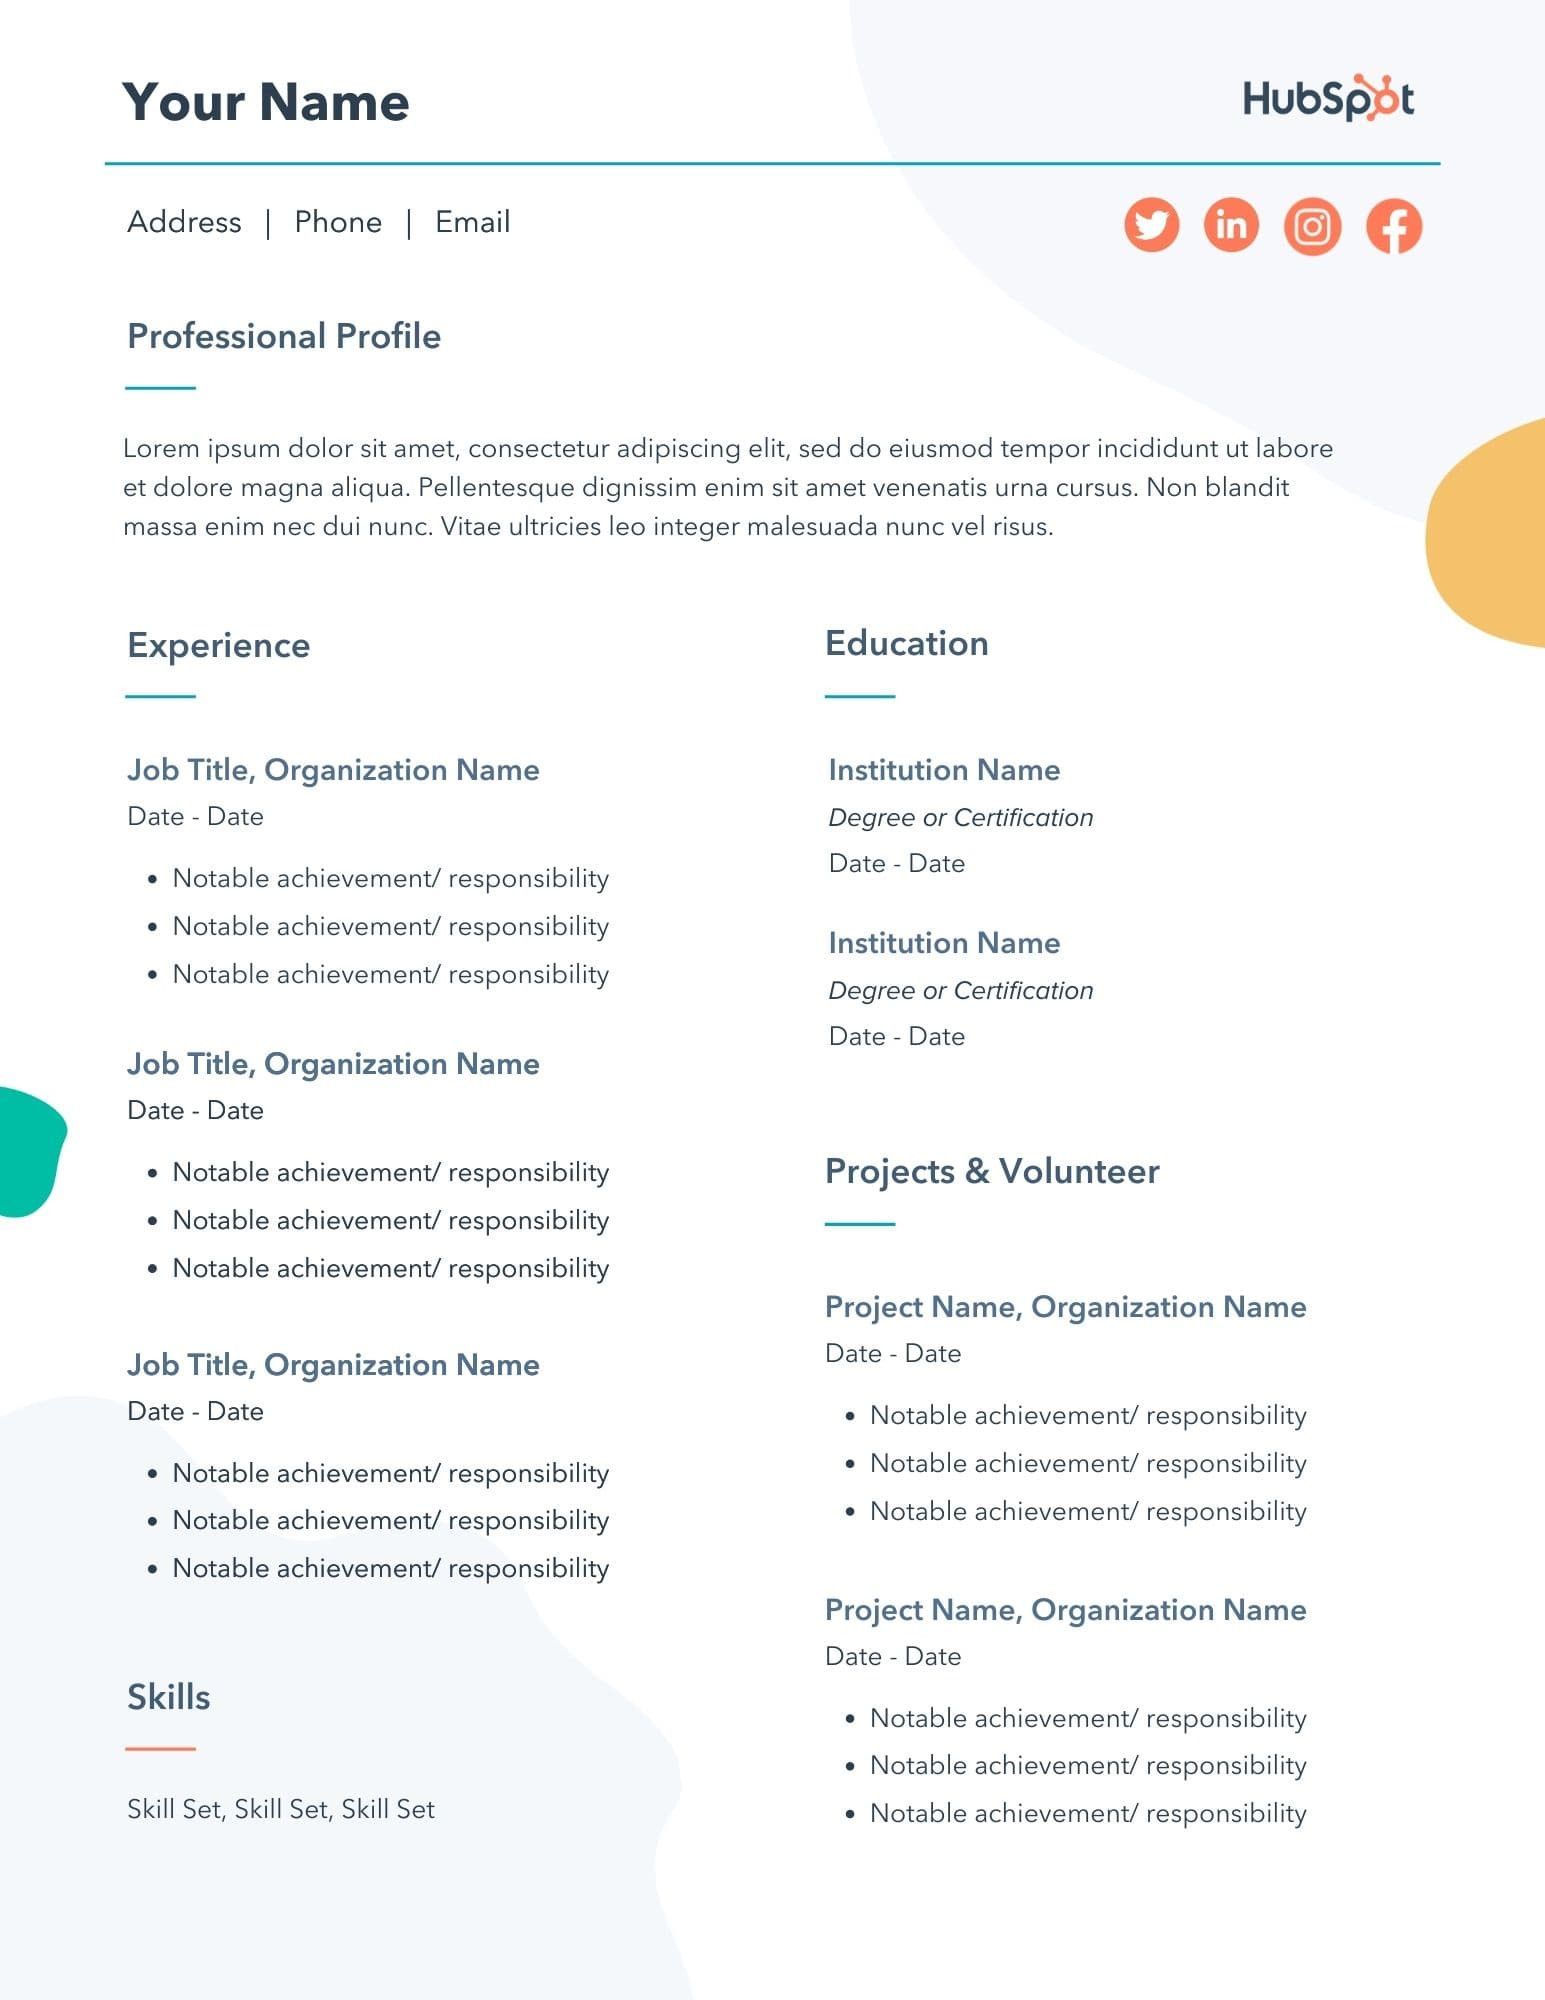 Sample Of A Well Written Resume 29 Free Resume Templates for Microsoft Word (& How to Make Your Own)